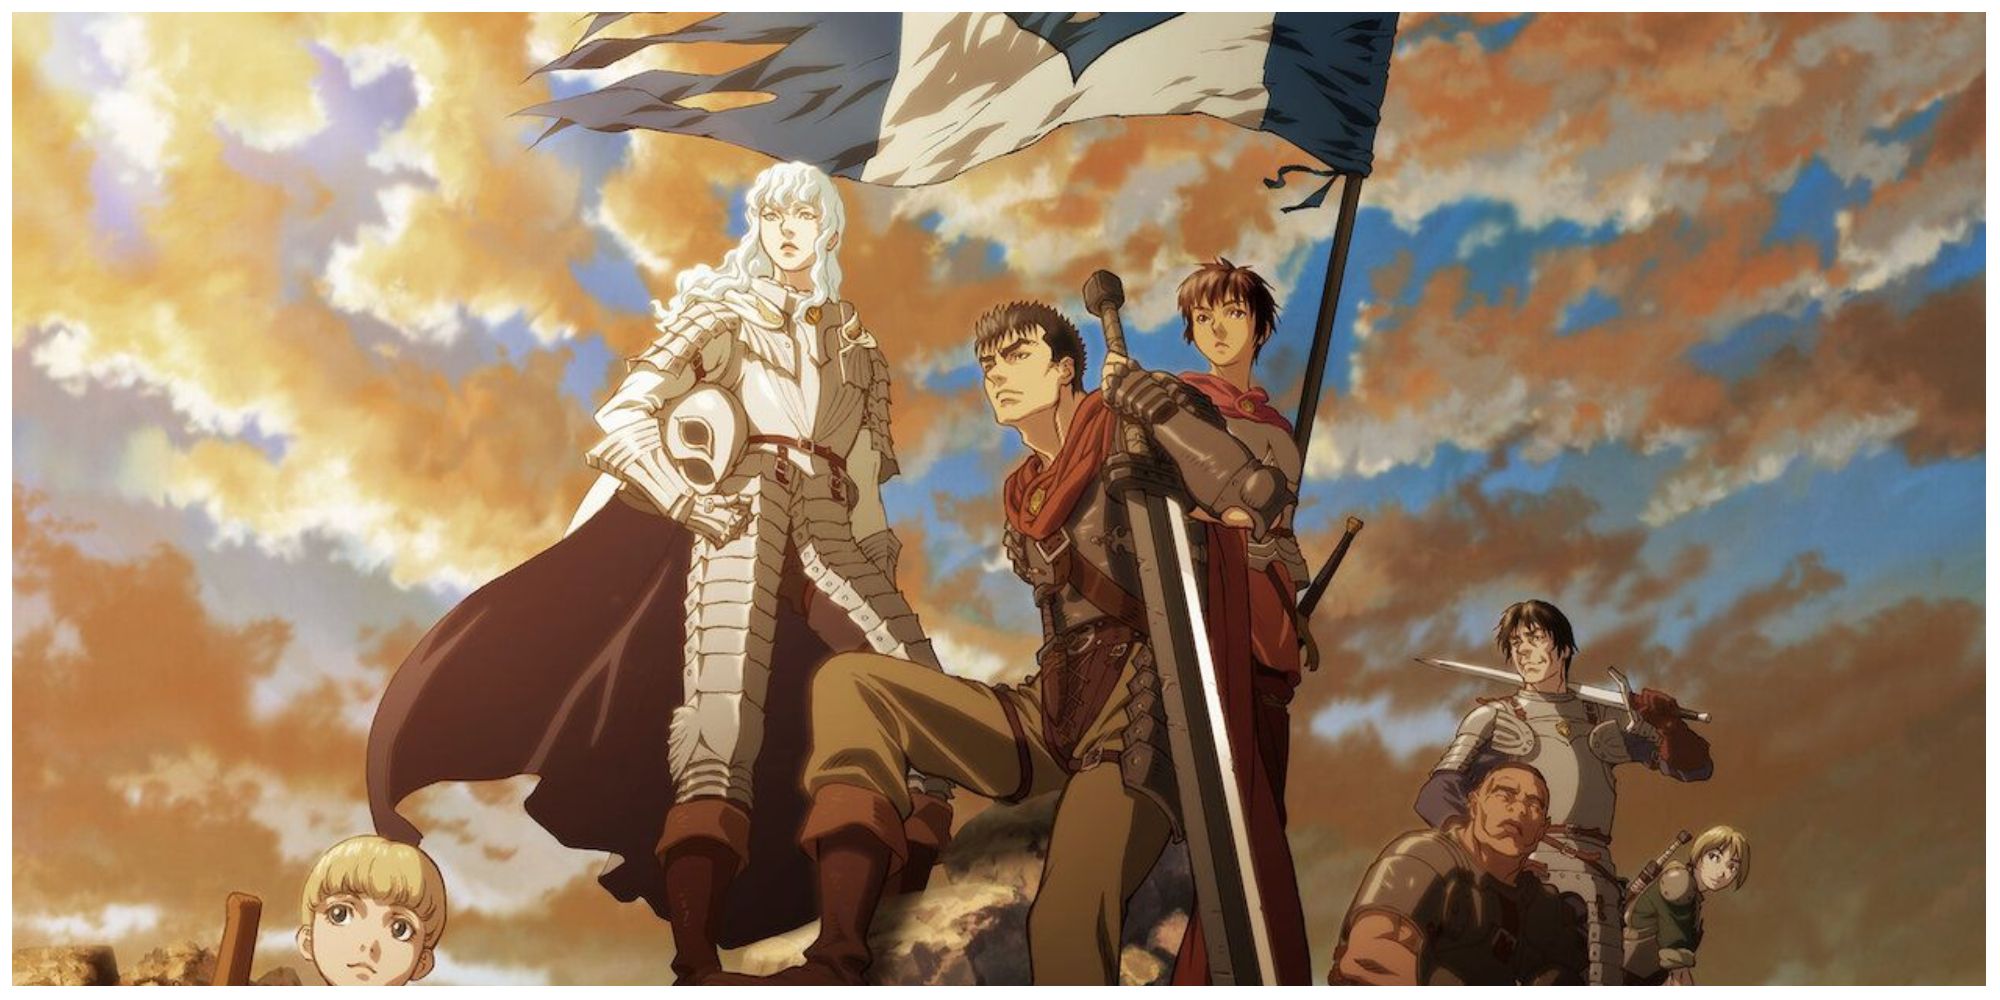 Guts, Griffith, and other cast members from Berserk.